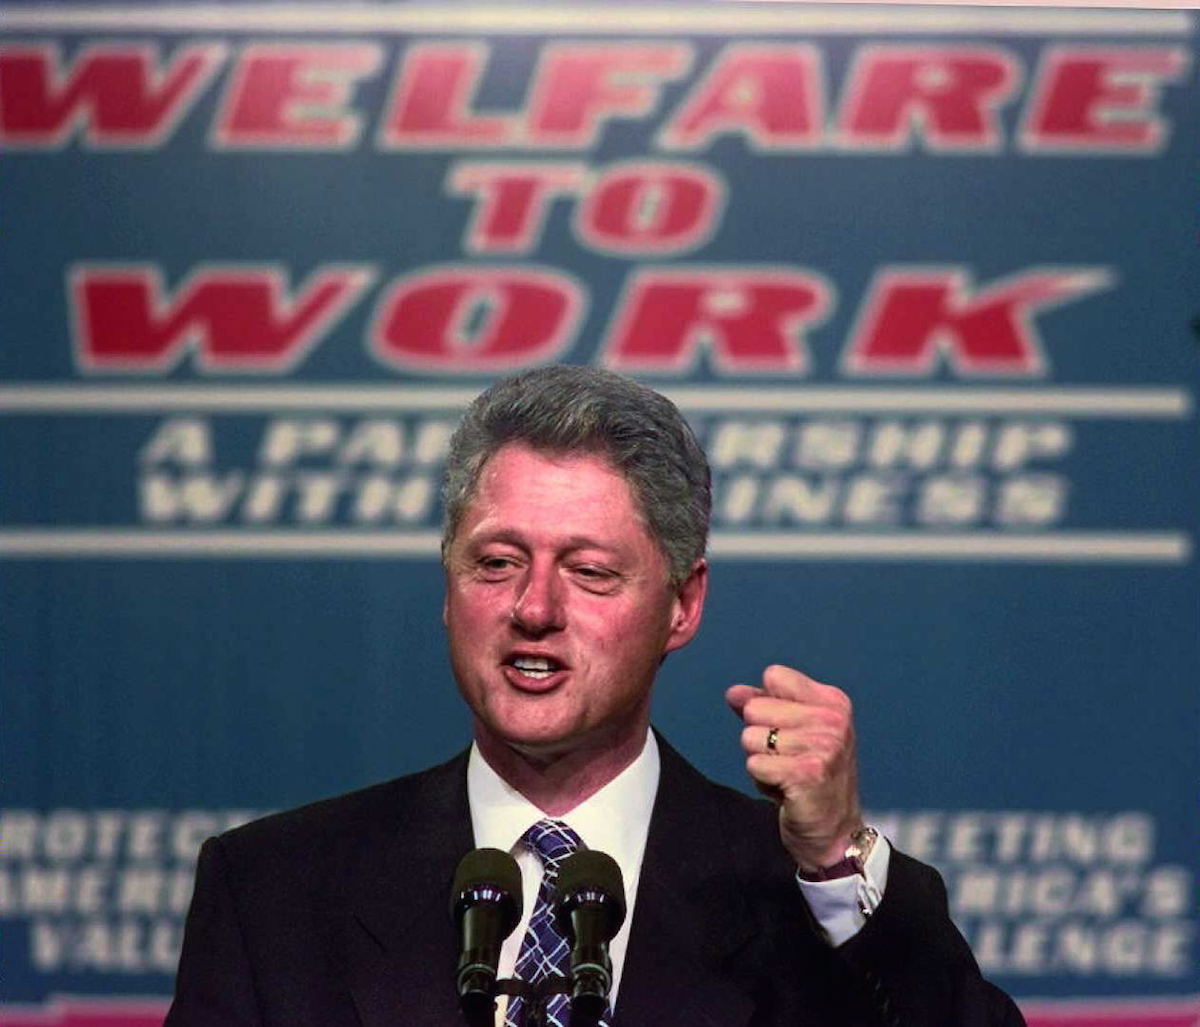 US President Bill Clinton clinches his fist during